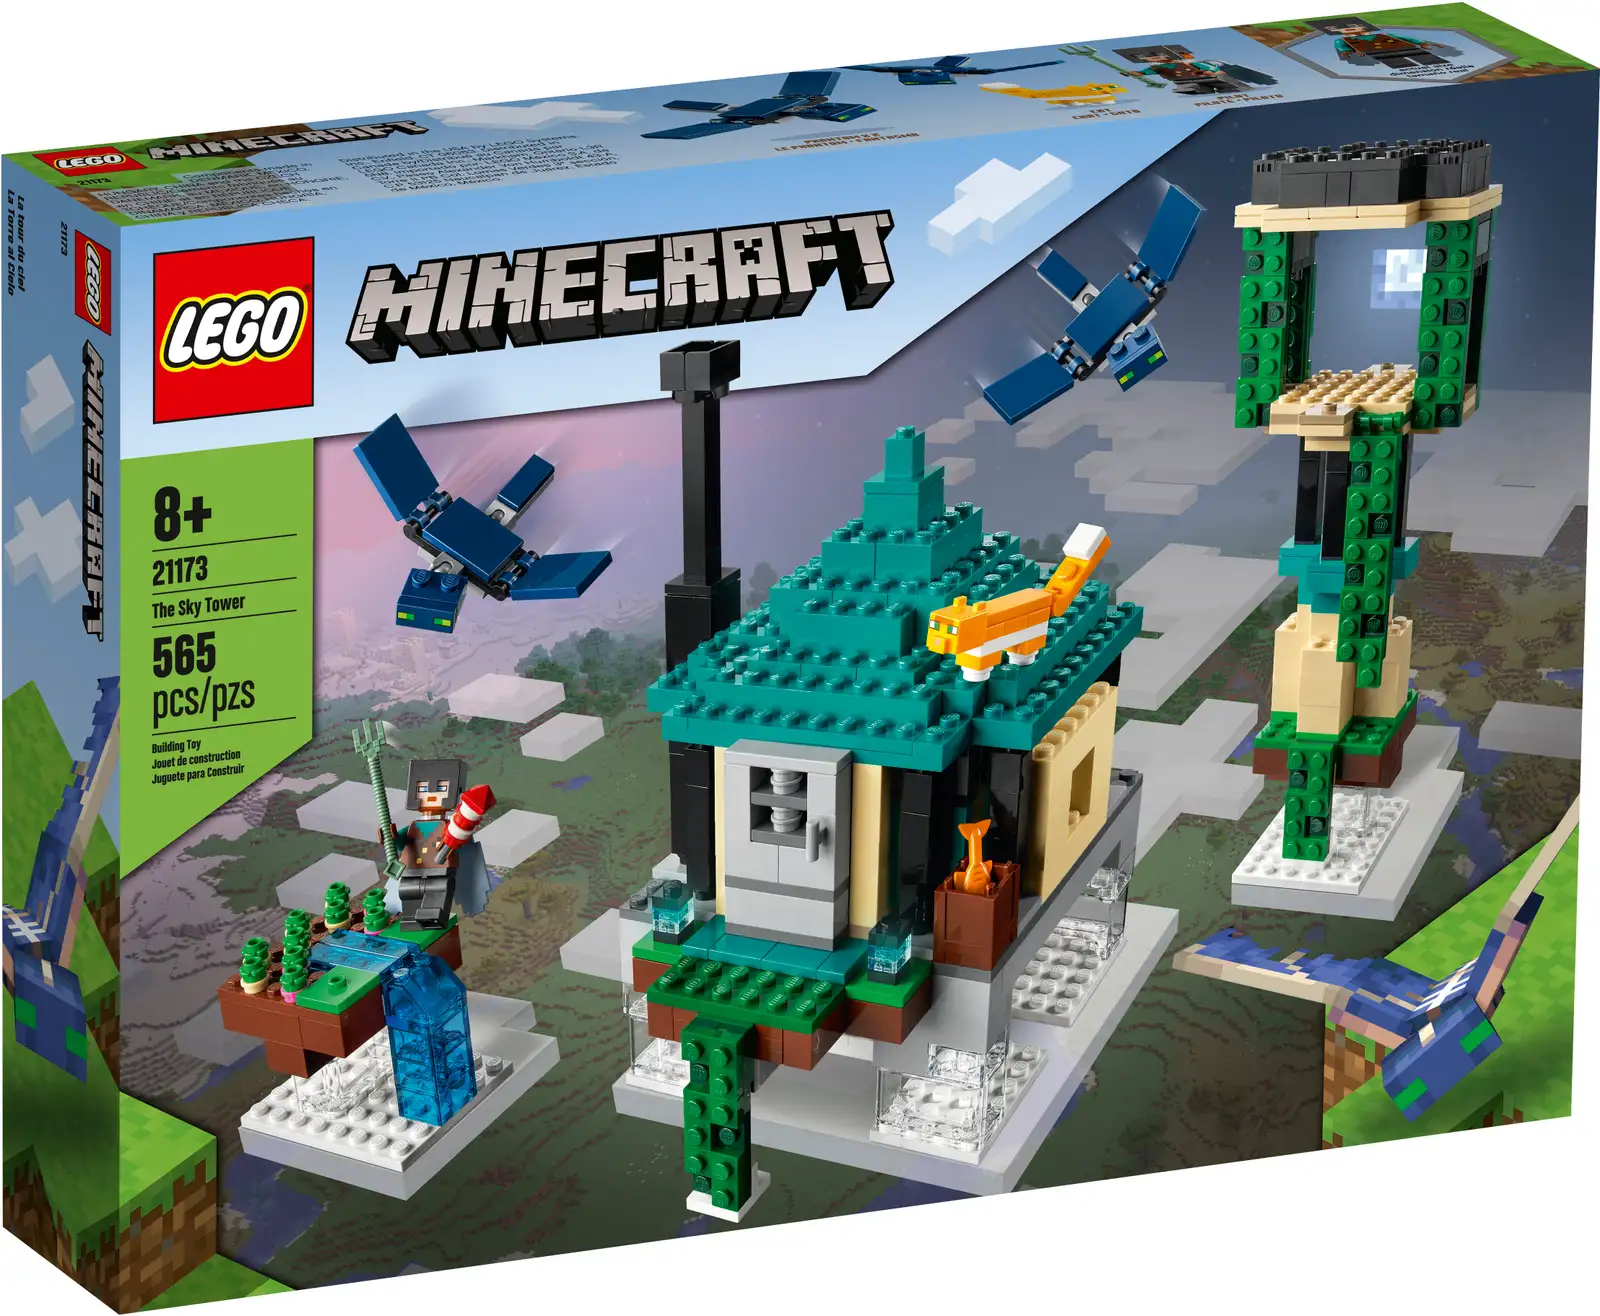 LEGO® Minecraft™ The Sky Tower (21173) is filled with authentic action and diverse environments that kids with a passion for Minecraft can reconfigure again and again for endless adventures in the clouds. Sky-high Minecraft creativity Kids use cool, authentic Minecraft features to fly into the sky and build a floating blacksmith’s house, a soaring tower and a garden island. The play possibilities range from growing vegetables to battling flying phantoms. This accessory-packed playset is infinitely reconfigurable so kids can rebuild, reimagine and enjoy endless adventures – just like in the online game, but with hands-on, creative construction. LEGO® Minecraft™ The Sky Tower (21173) incorporates a diverse range of buildable environments that reconfigure in infinite ways to inspire Minecraft adventures that never end. Includes a Pilot figure with elytra wings, netherite helmet, firework rocket and trident; 2 flying phantoms; an orange tabby cat; and lots of authentic accessories. This fantastically versatile playset encourages kids to continually adapt their creations and explore new adventures. It’s just like the video game, but with hands-on, creative construction. Minecraft™ players and creative builders aged 8 and up will enjoy endless hands-on, immersive pleasure with this imagination-inspiring playset. Measuring over 7 in. (18 cm) high, 6 in. (15 cm) wide and 5 in. (12 cm) deep, this reconfigurable set is ideal for imaginative play, creative display and combining with other LEGO® Minecraft™ sets. The colorful playset contains many authentic Minecraft™ accessories, including a crafting table, anvil, grindstone, soul lanterns, potatoes, beetroots and a barrel of fish. LEGO® Minecraft™ playsets give Minecraft players a new way to enjoy their favorite game, with characters, scenes and features brought to life by an imaginative mix of LEGO bricks and pieces. LEGO® building kits meet stringent industry quality standards to ensure they are consistent, compatible and connect and pull apart perfectly every time – it’s been that way since 1958. LEGO® components are dropped, heated, crushed, twisted and analyzed to make sure they meet rigorous global safety standards.